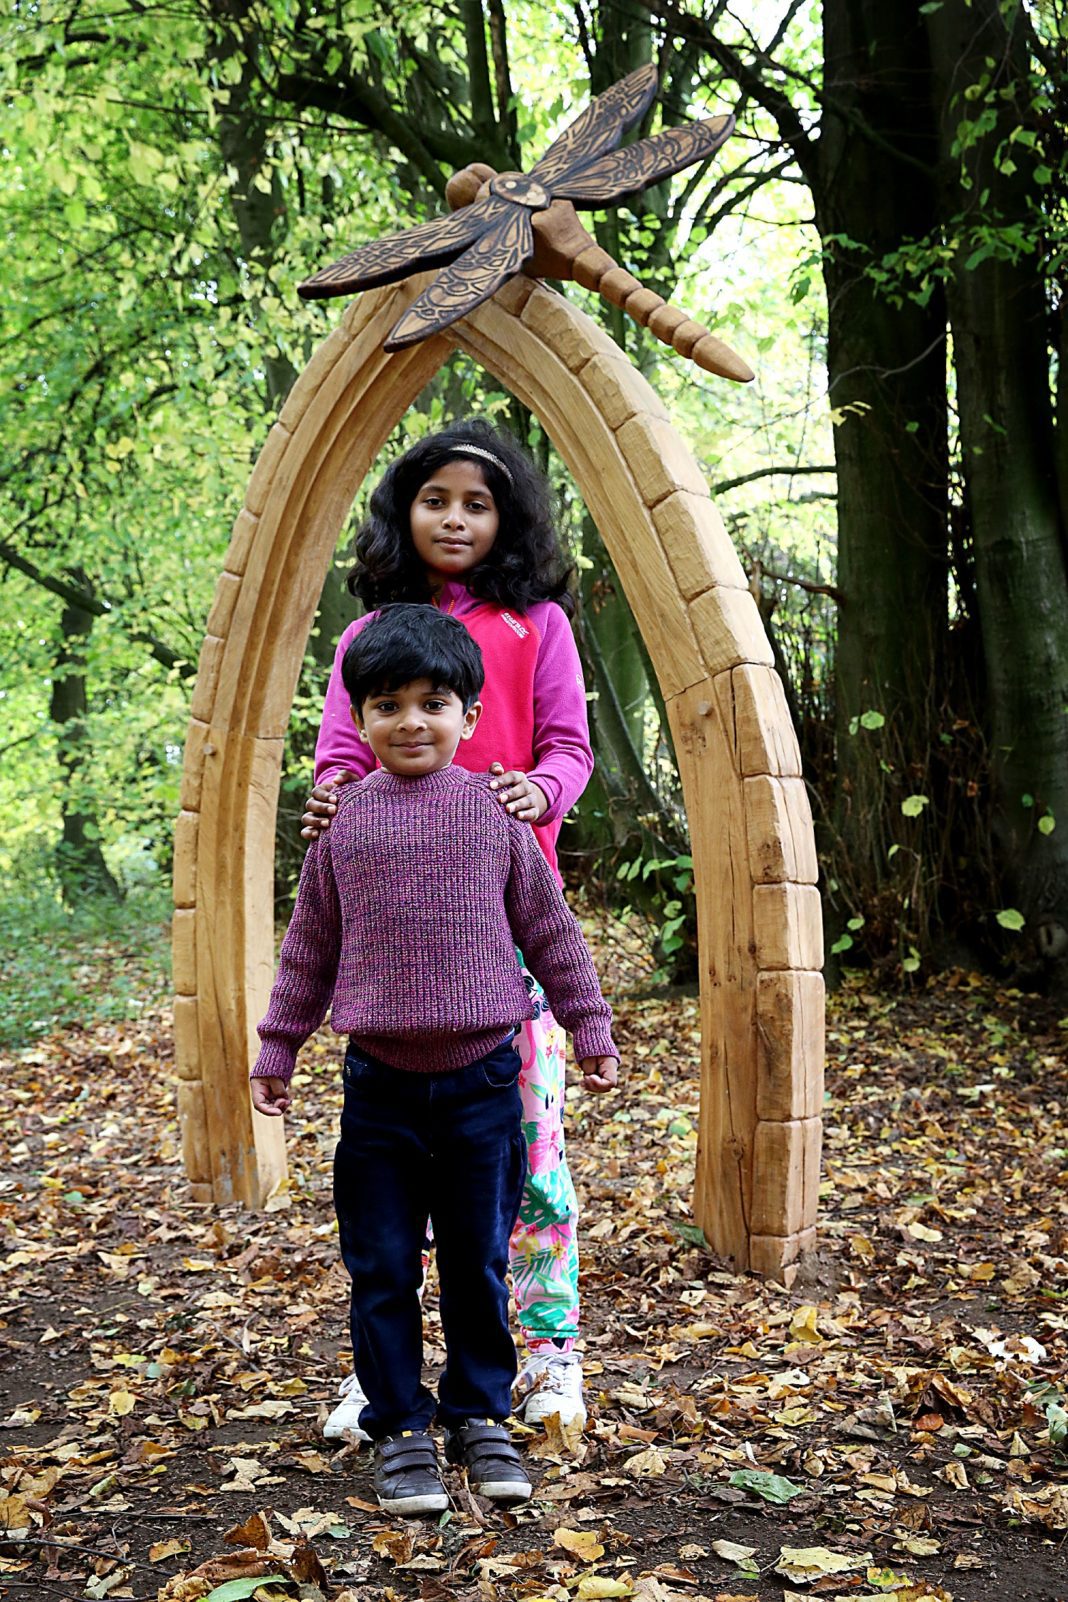 New Carved Sculptures Making Up New Trail At Hardwick Park Prove To Be Popular